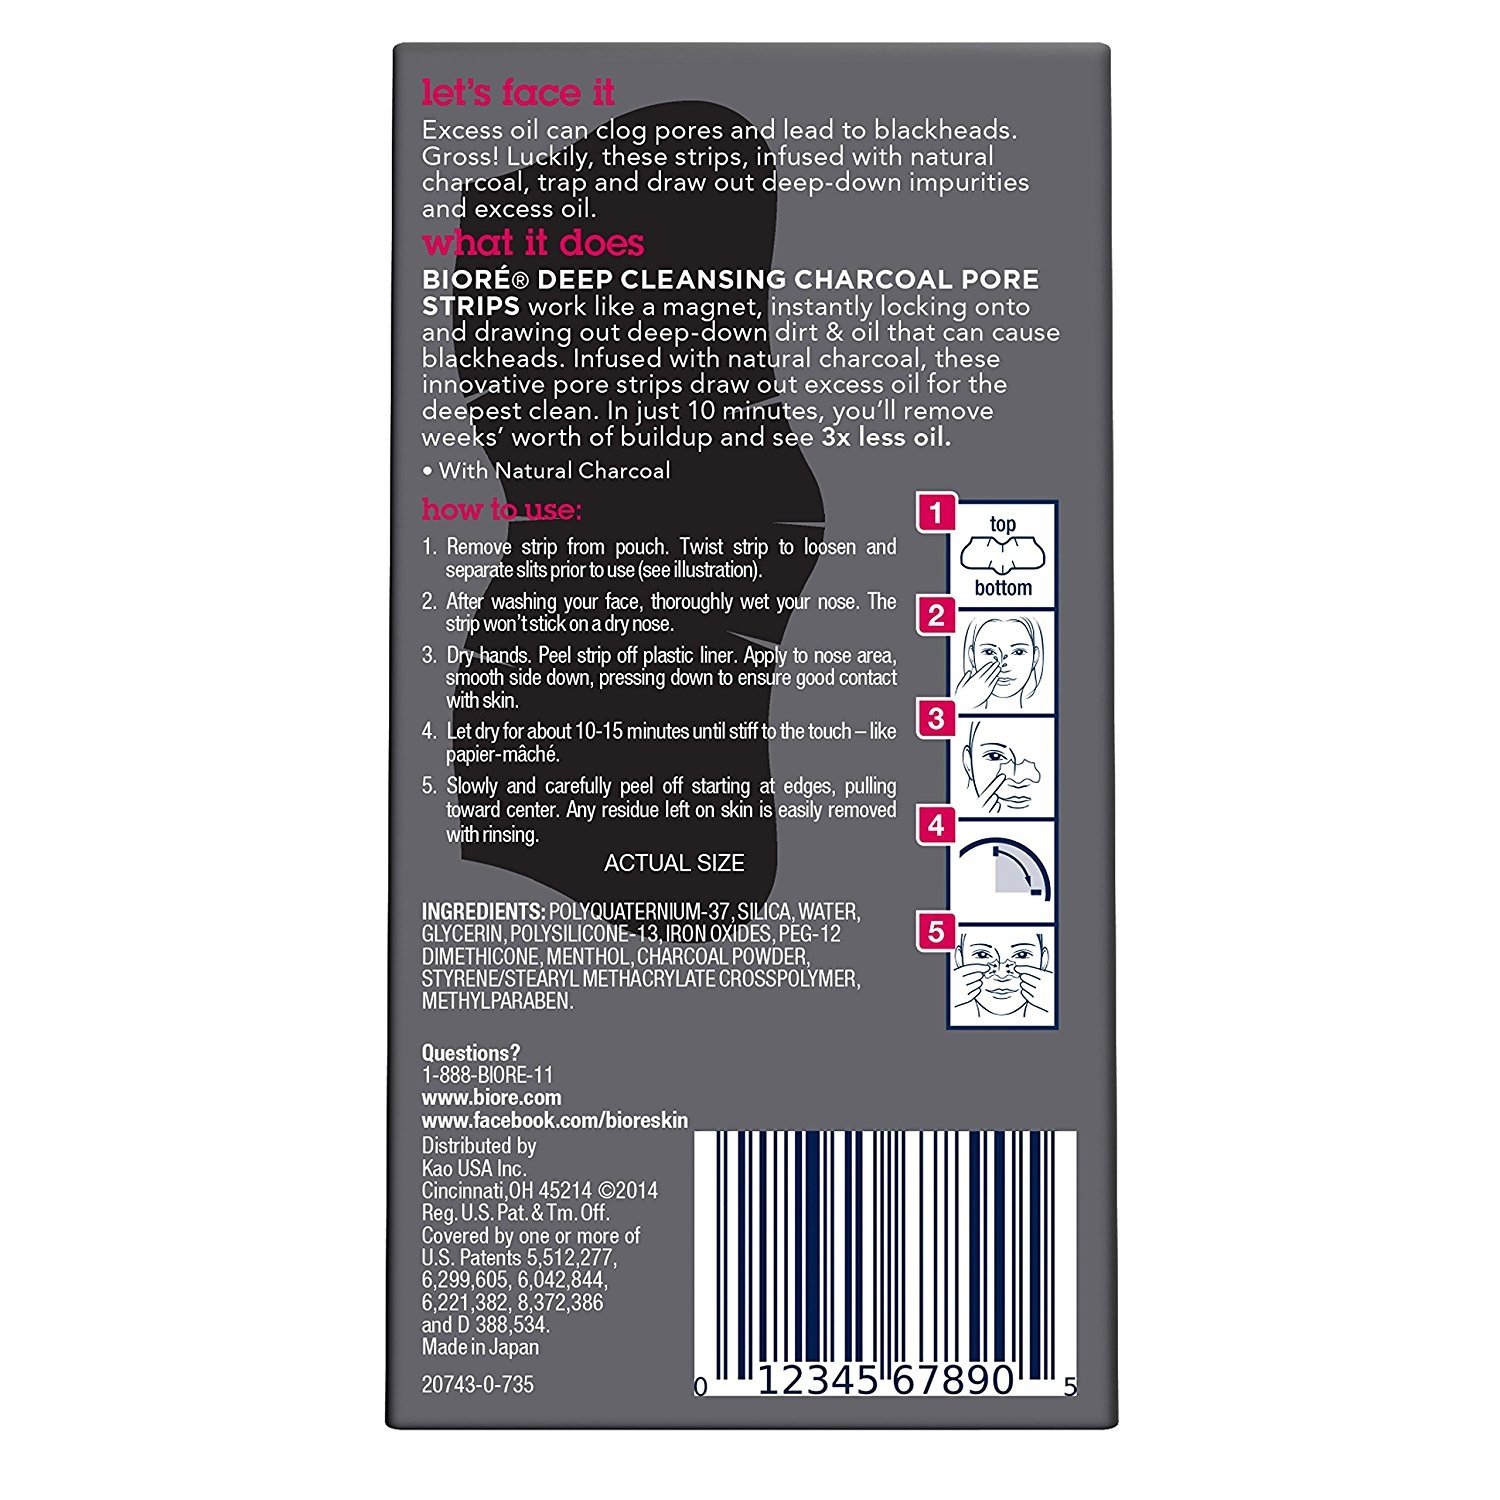 Biore Deep Cleansing Charcoal Pore Strips for Nose, 6 Count - image 2 of 6